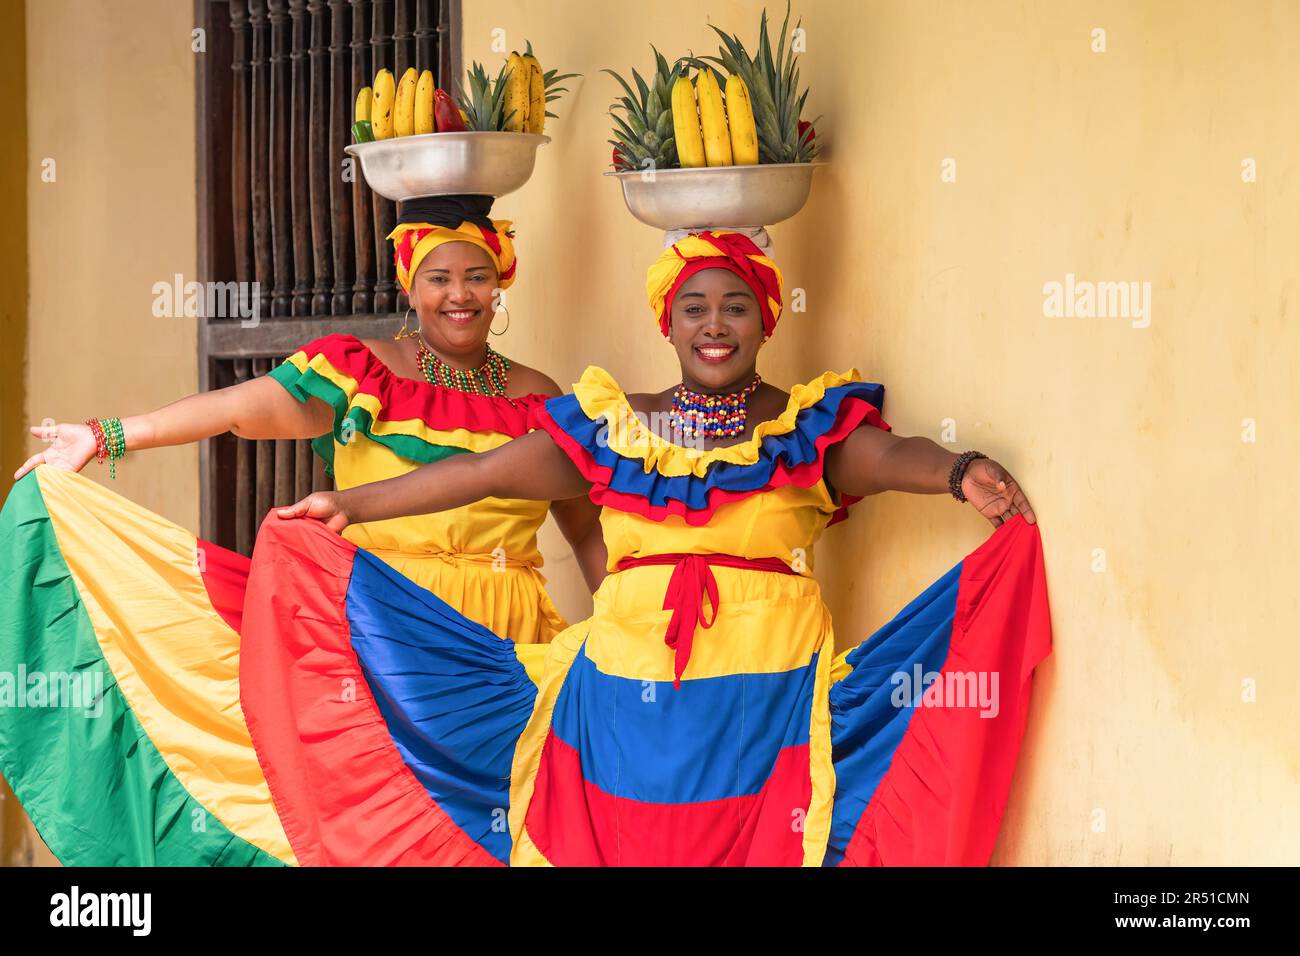 Happy, smiling Palenquera fresh fruit street vendors in the Old Town of Cartagena, Colombia. Cheerful Afro-Colombian women in traditional clothing. Stock Photo